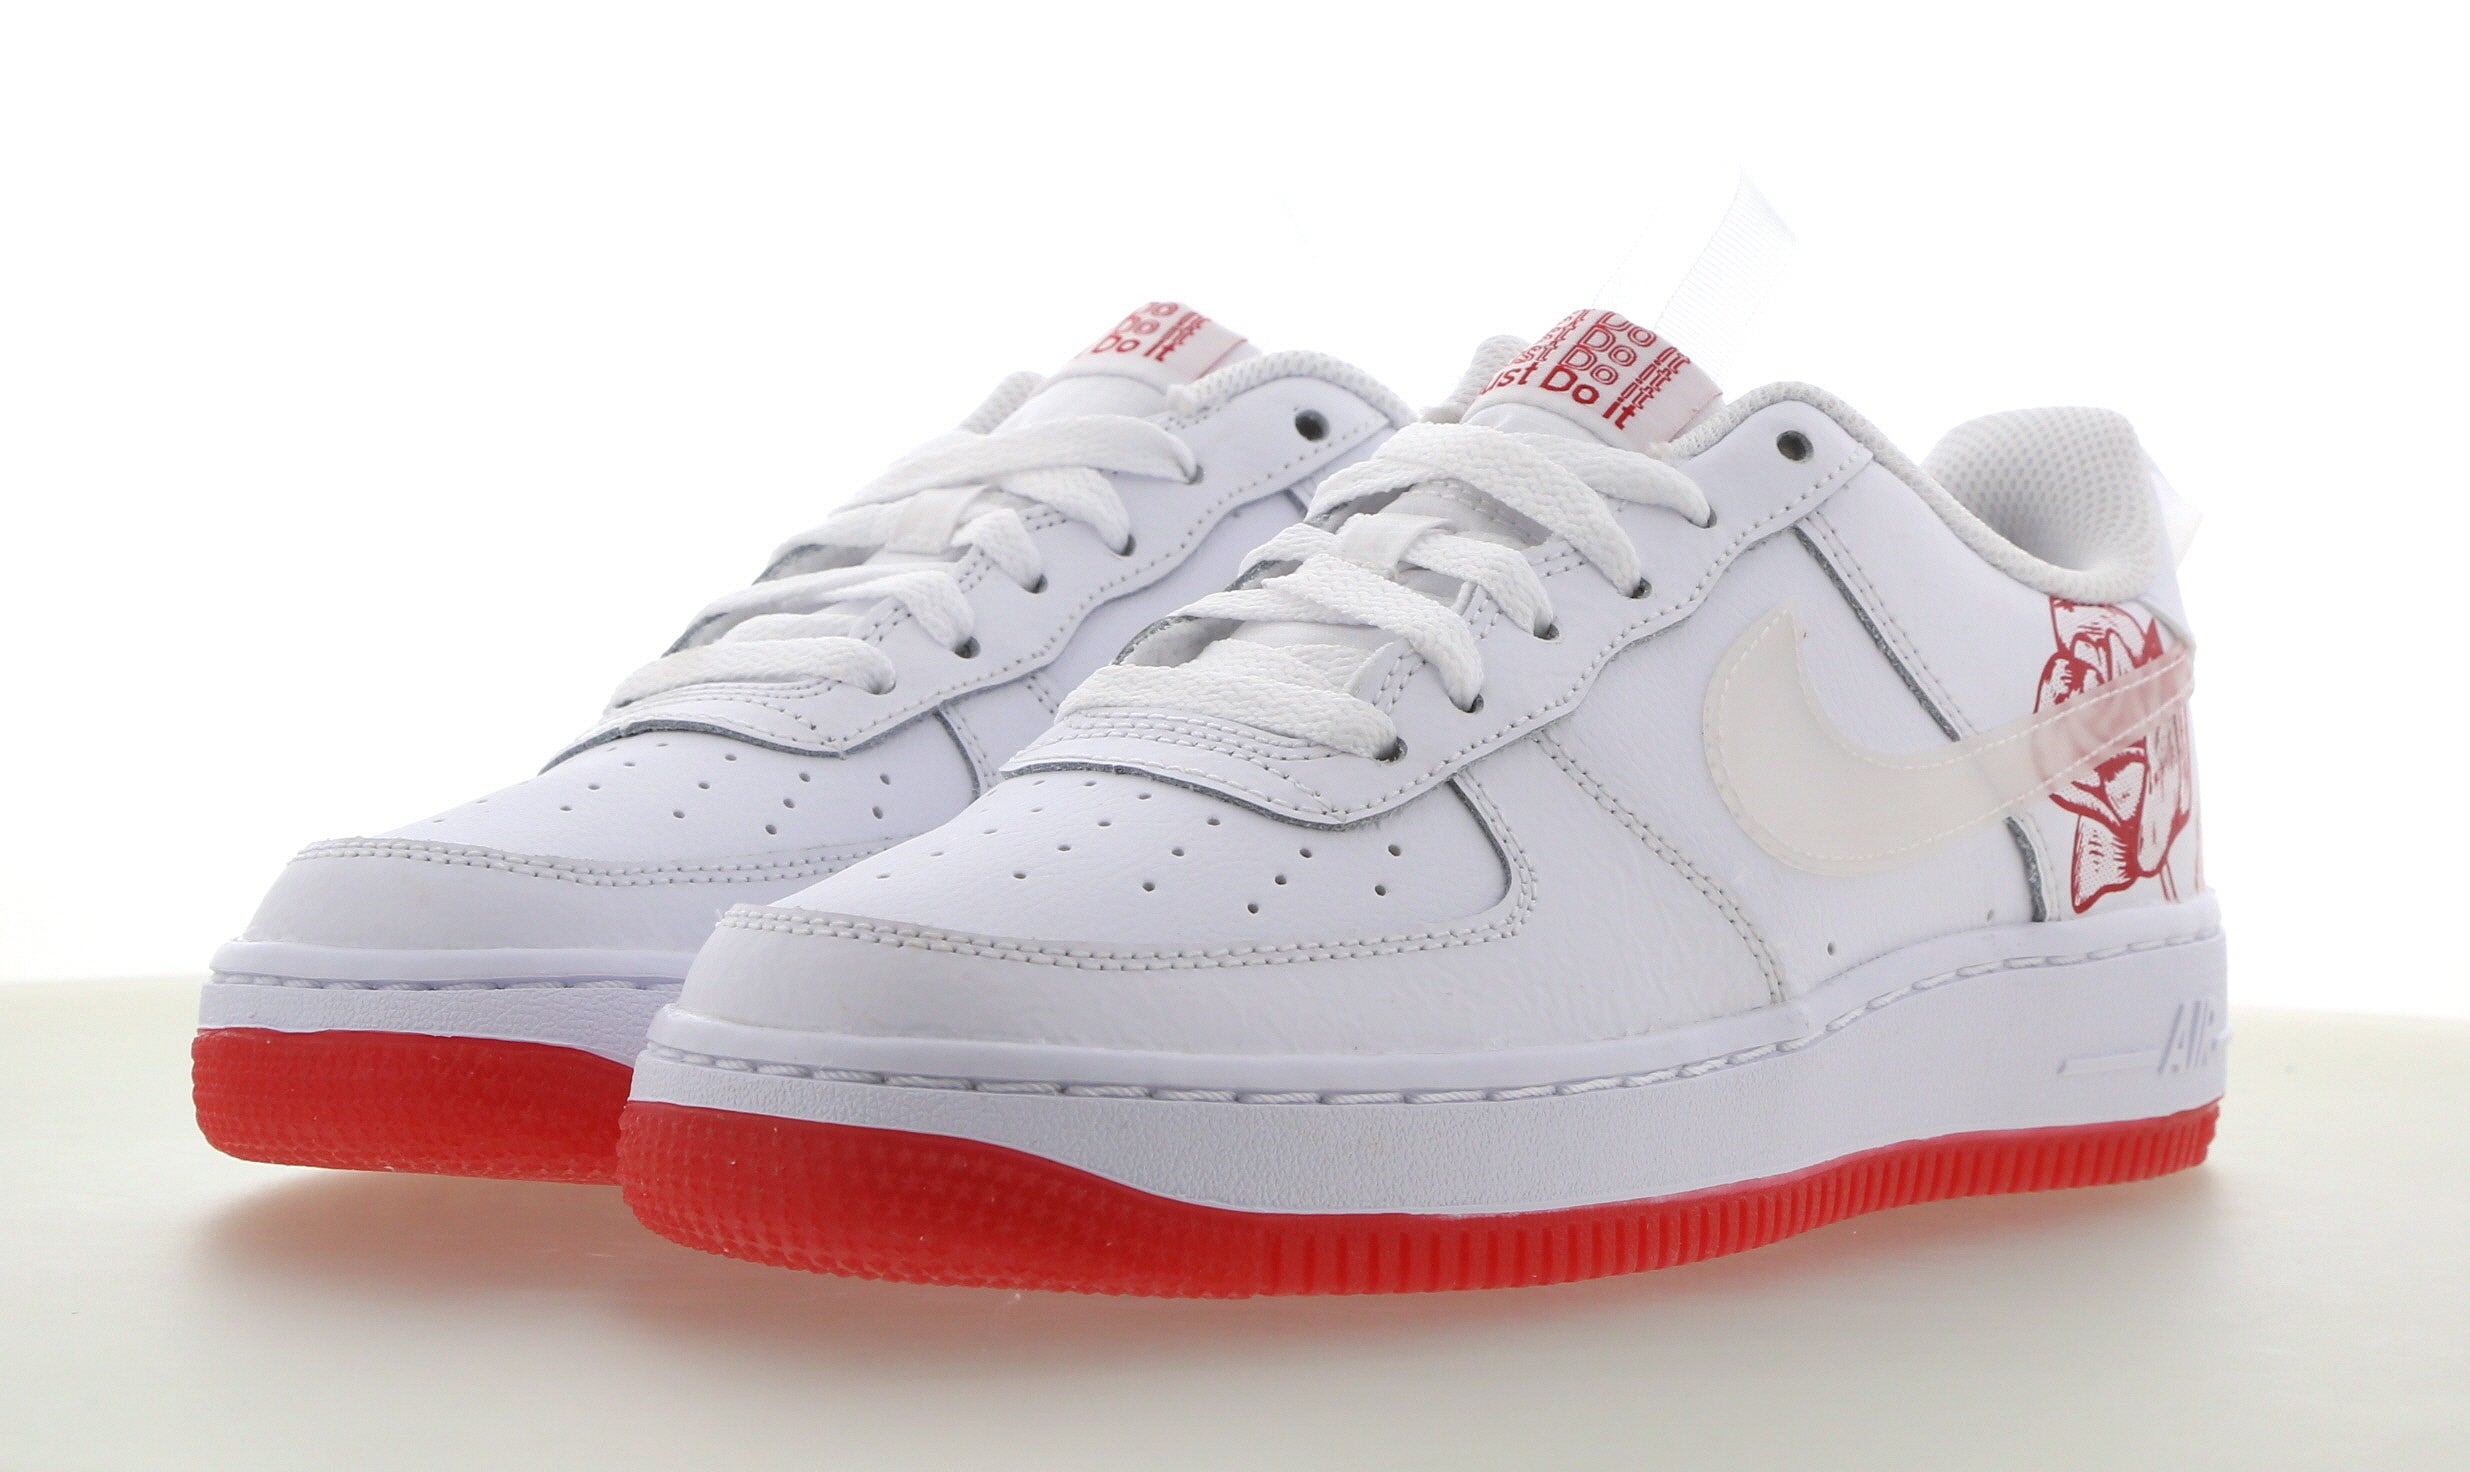 all white air force 1 low grade school